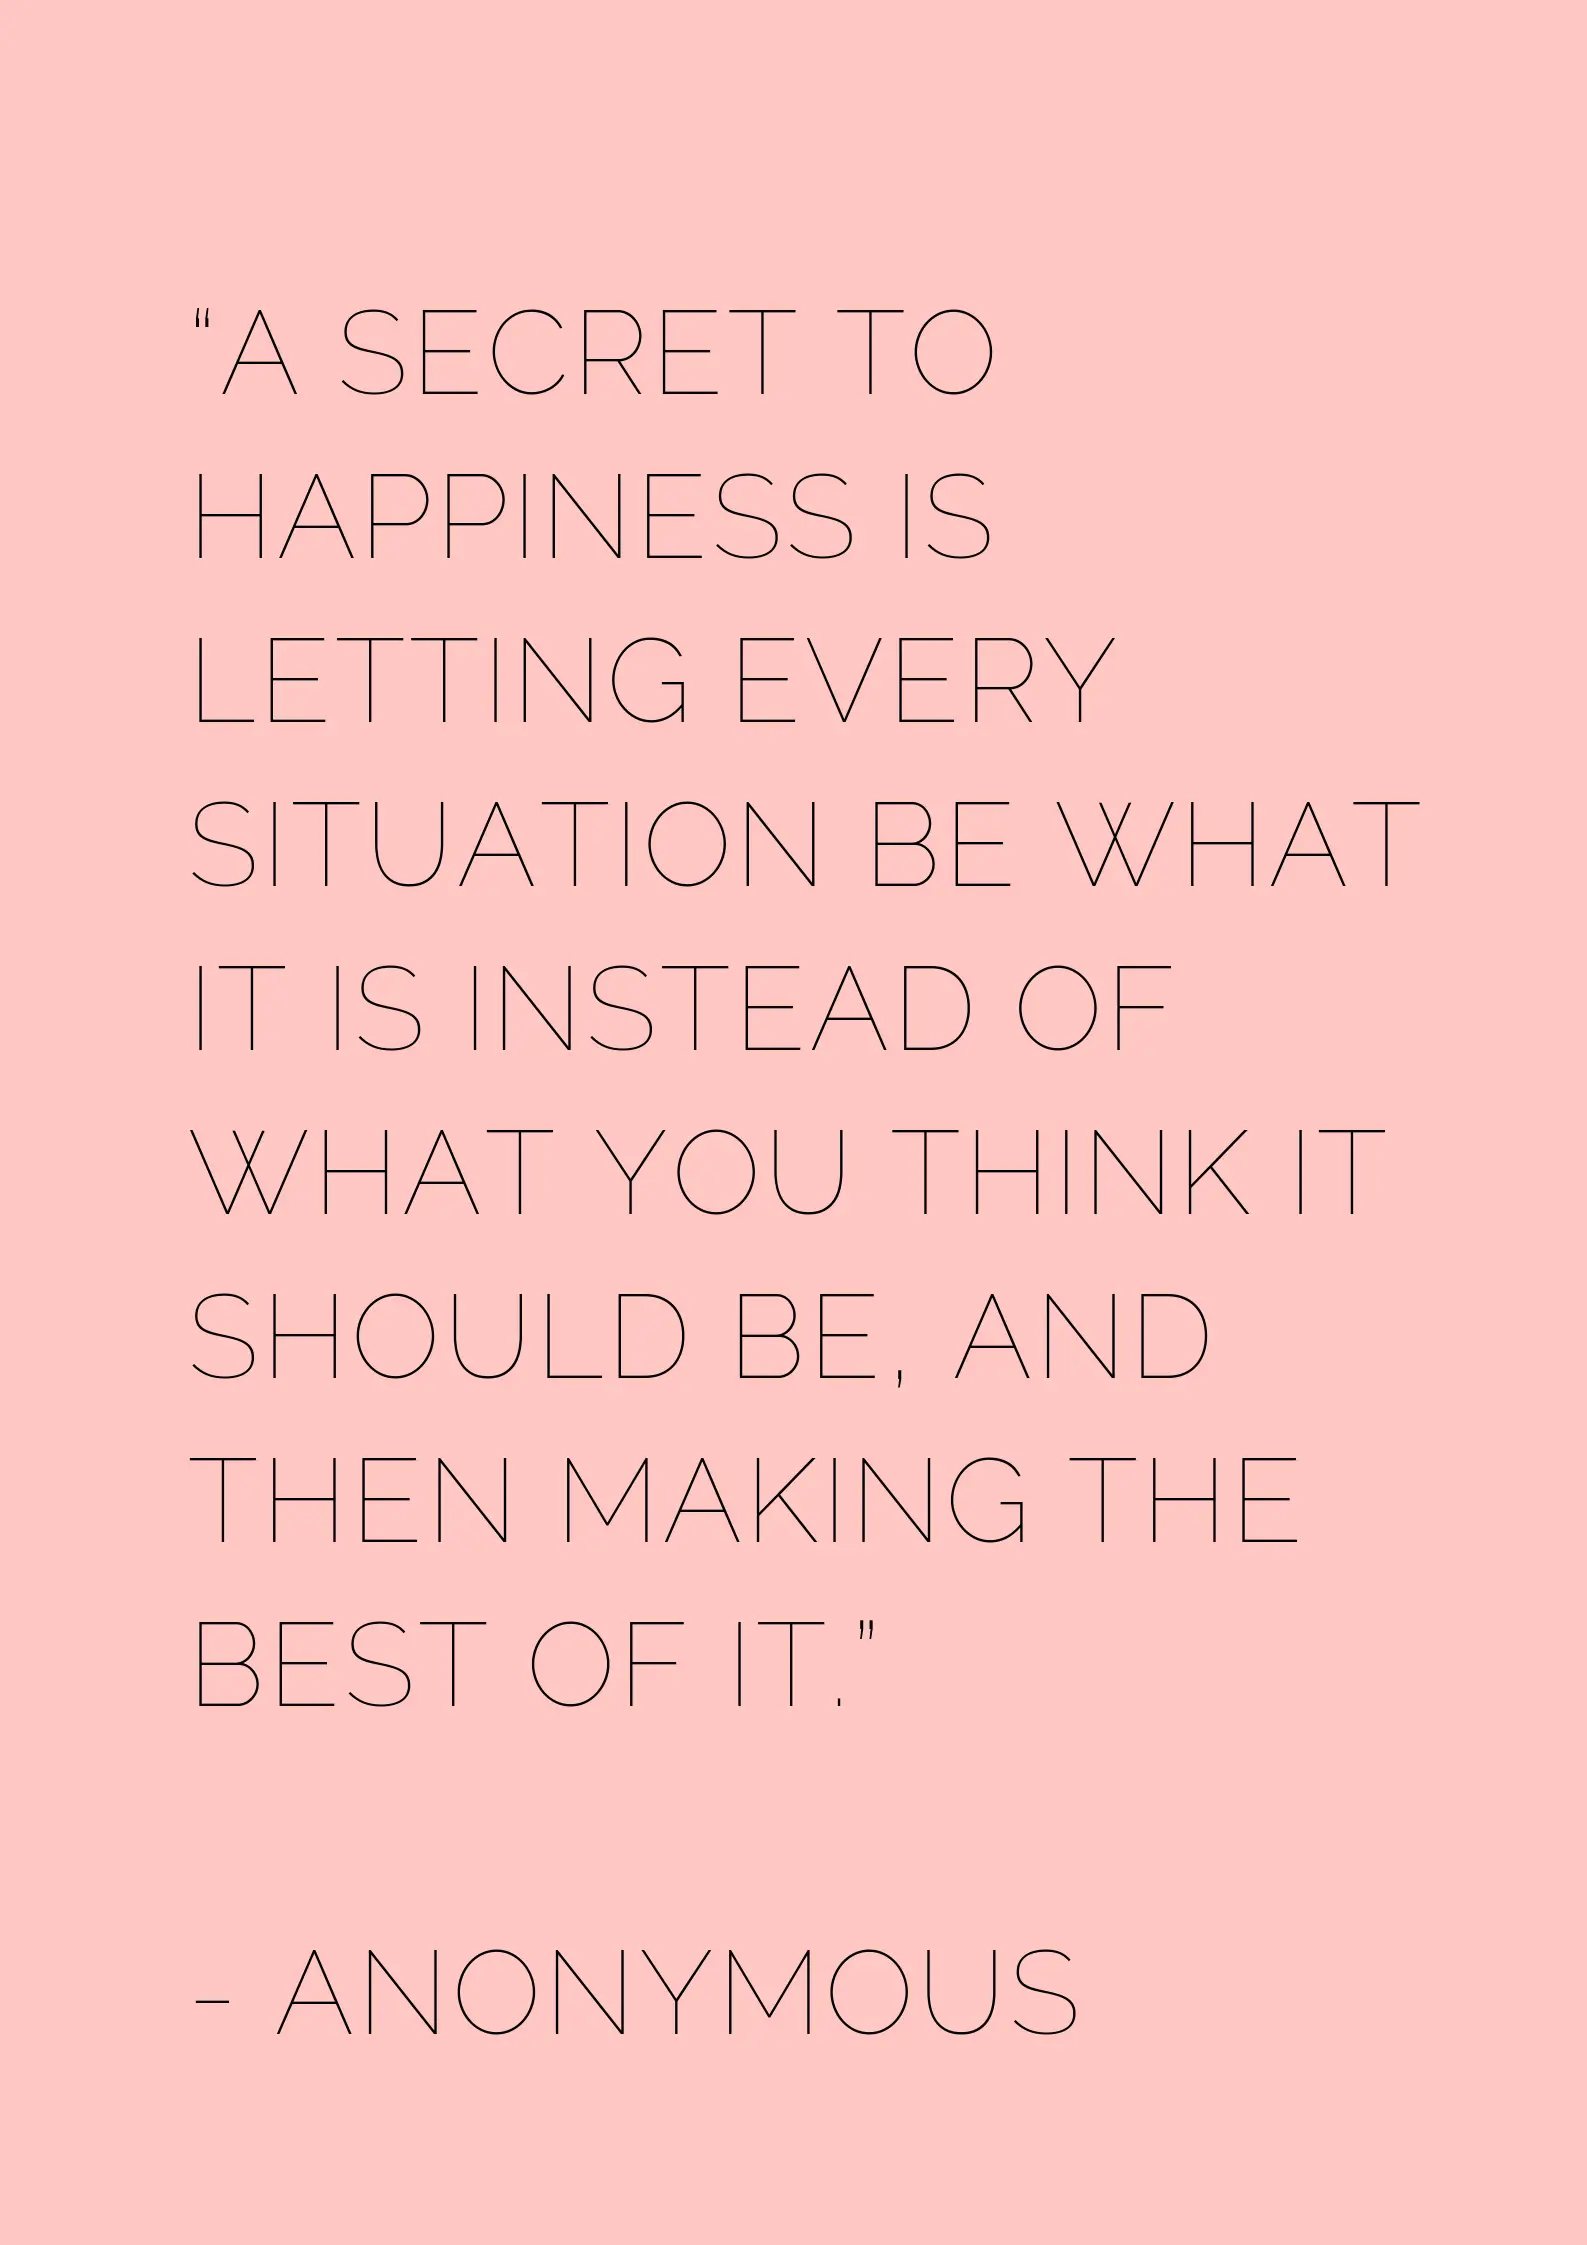 “A secret to happiness is letting every situation be what it is instead ...